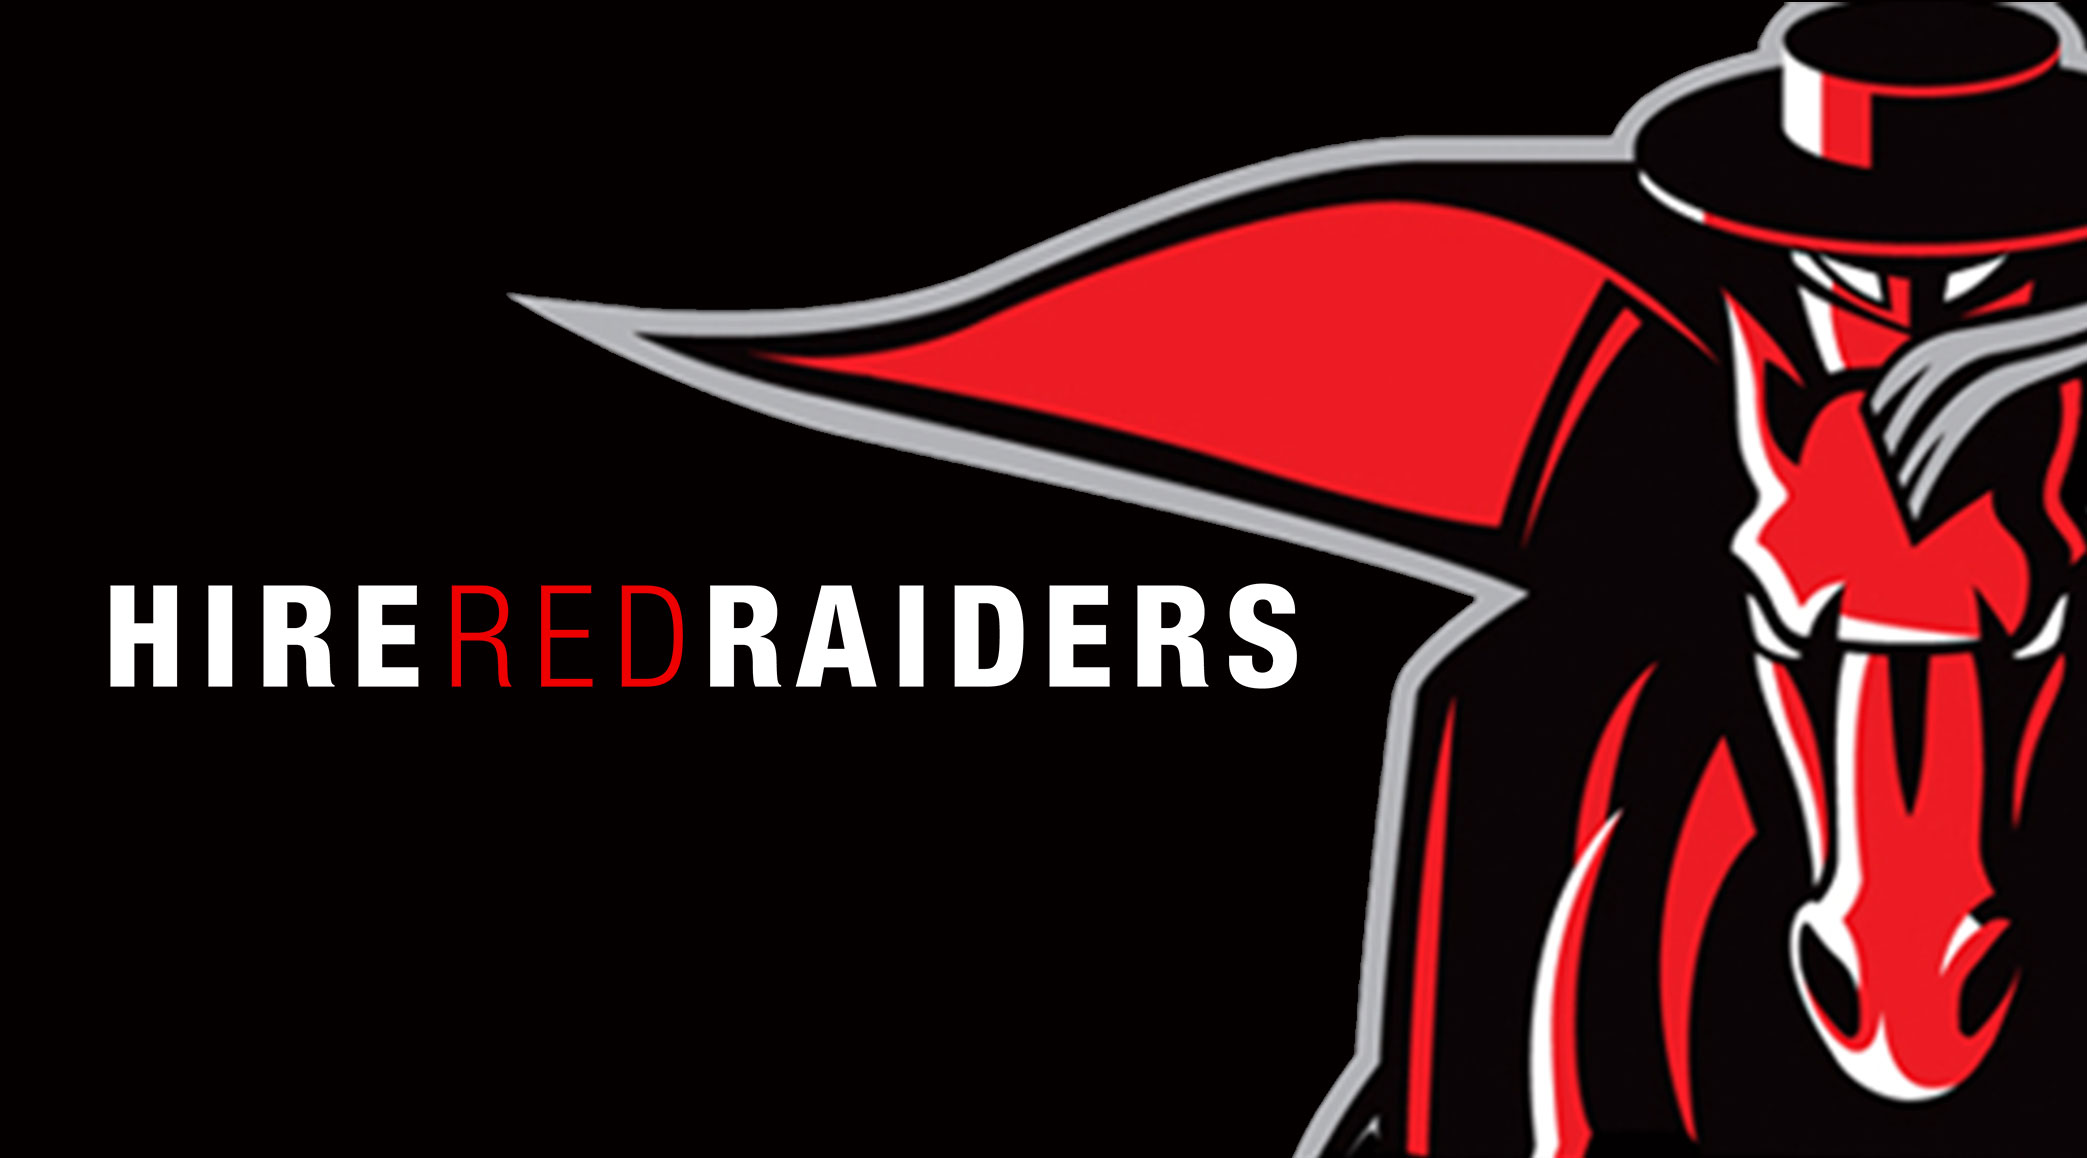 Texas Tech University Career Center's Job Posting website is: Hire Red Raiders. View available internships and full time positions.